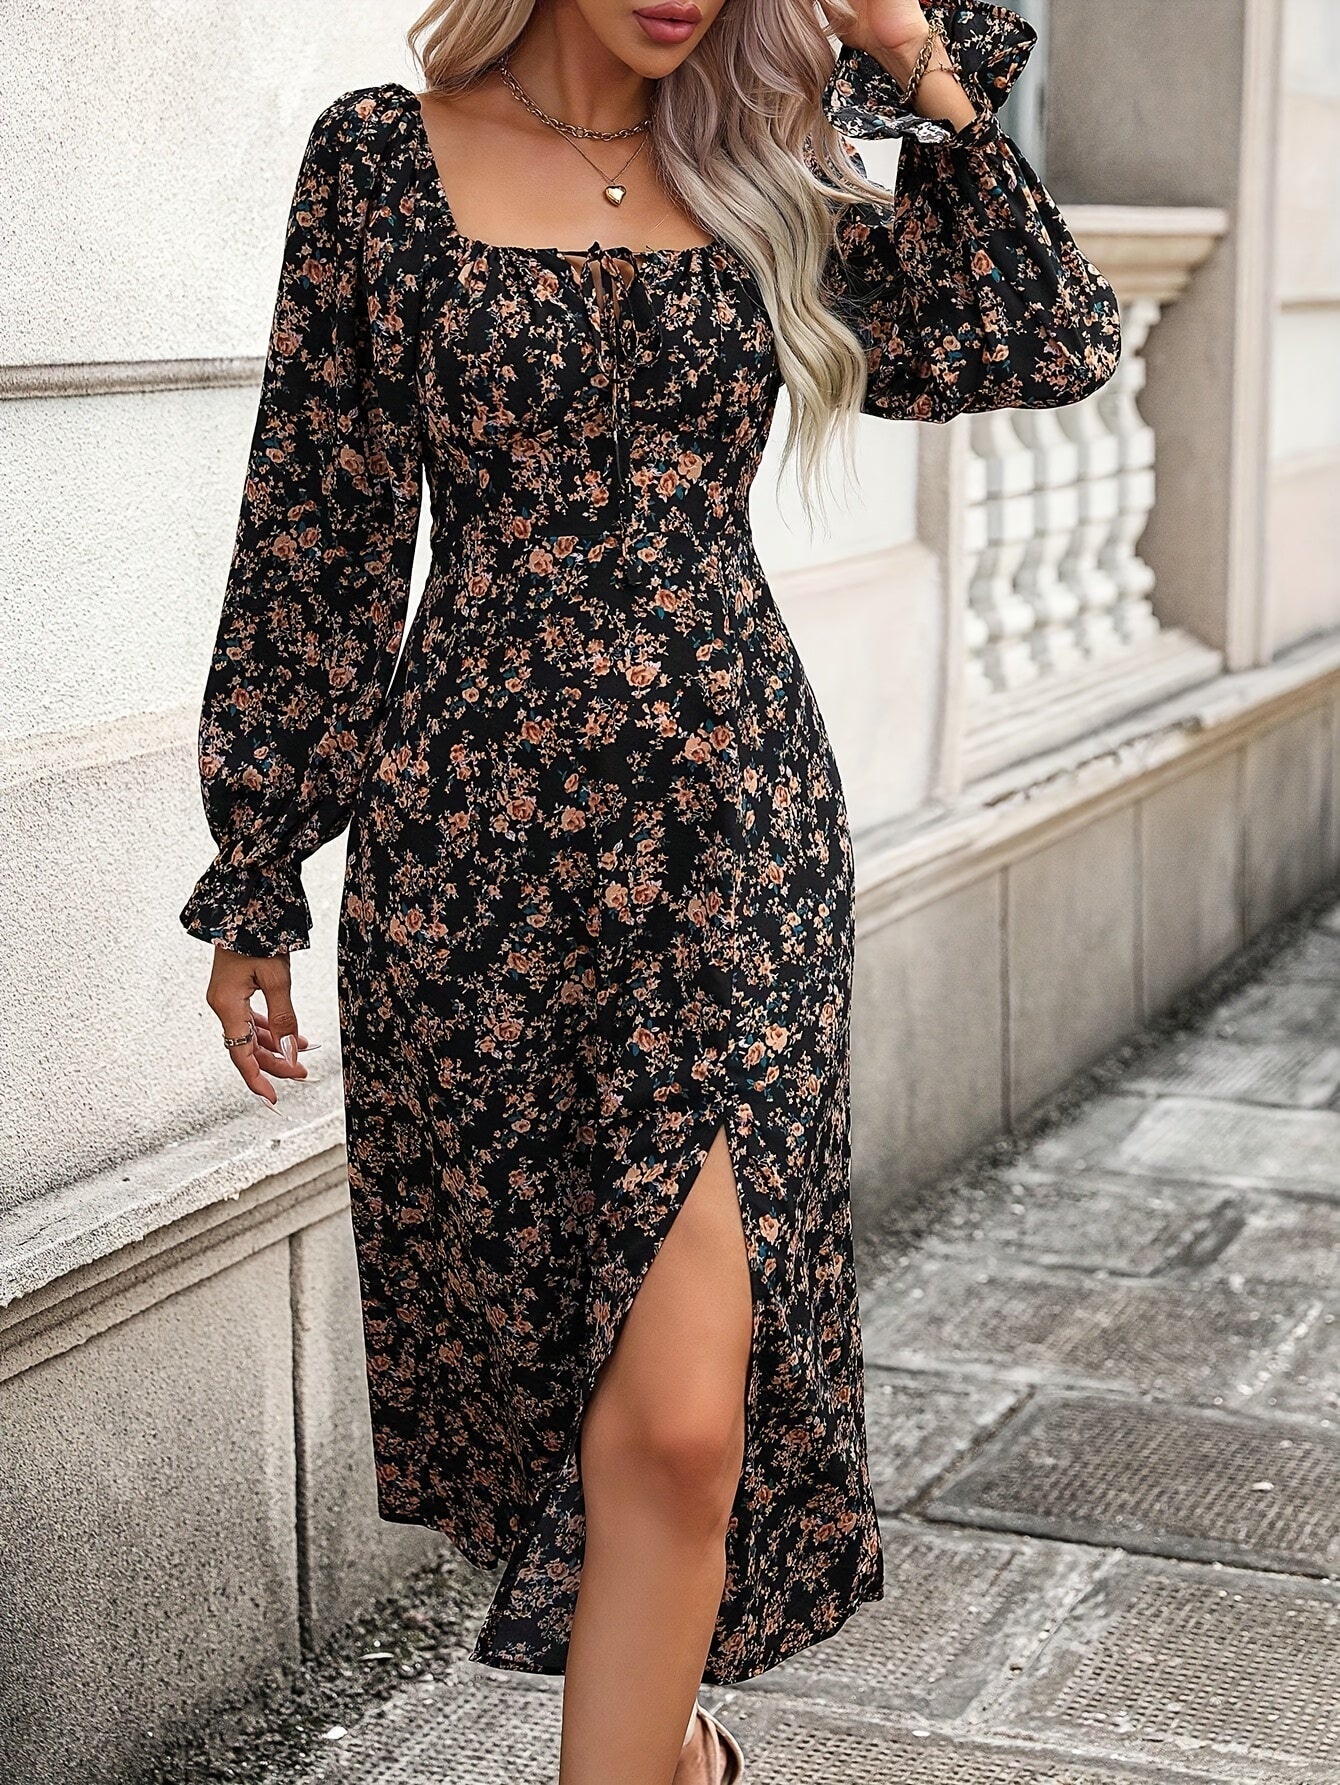 Antmvs Floral Print Long Sleeve Dress, Chic Square Neck Dress For Spring & Fall, Women's Clothing